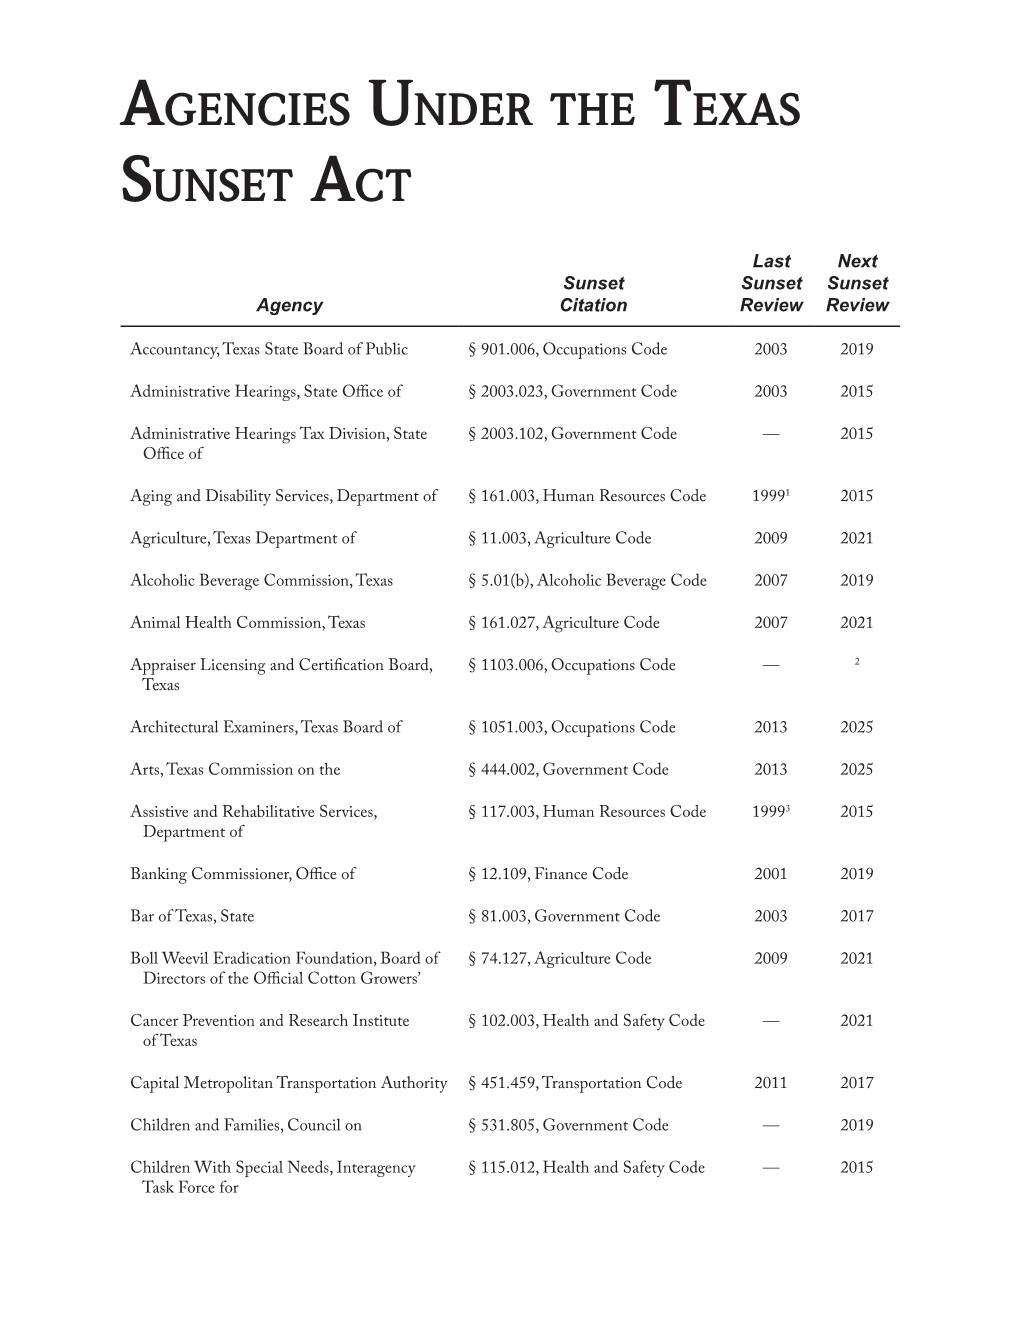 Agencies Under the Texas Sunset Act